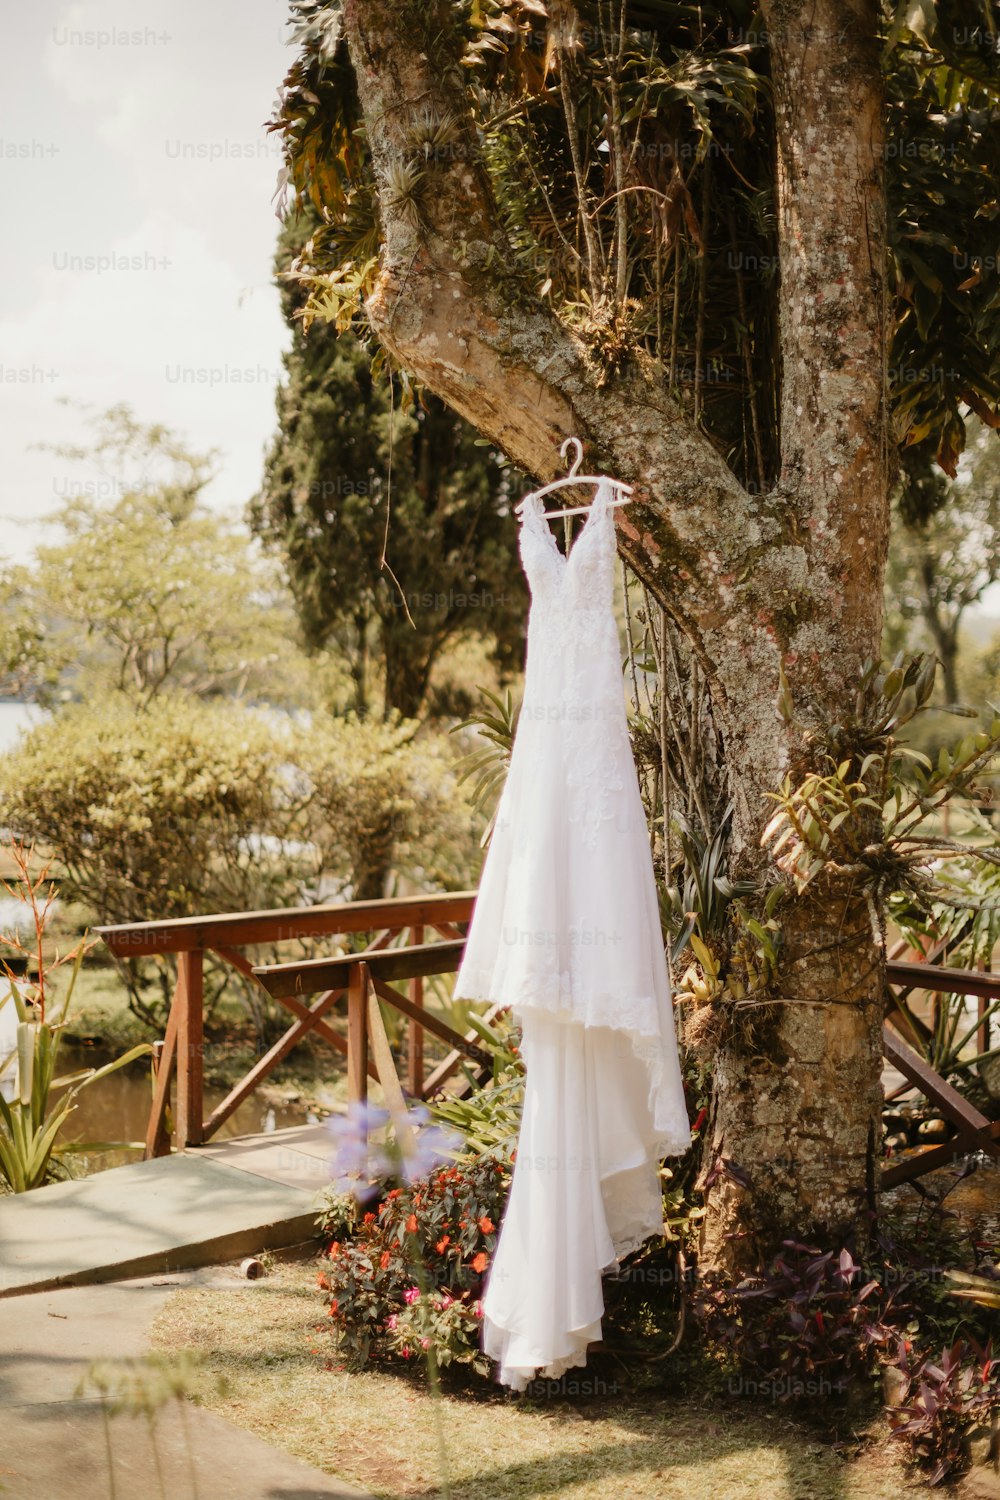 a wedding dress hanging from a tree